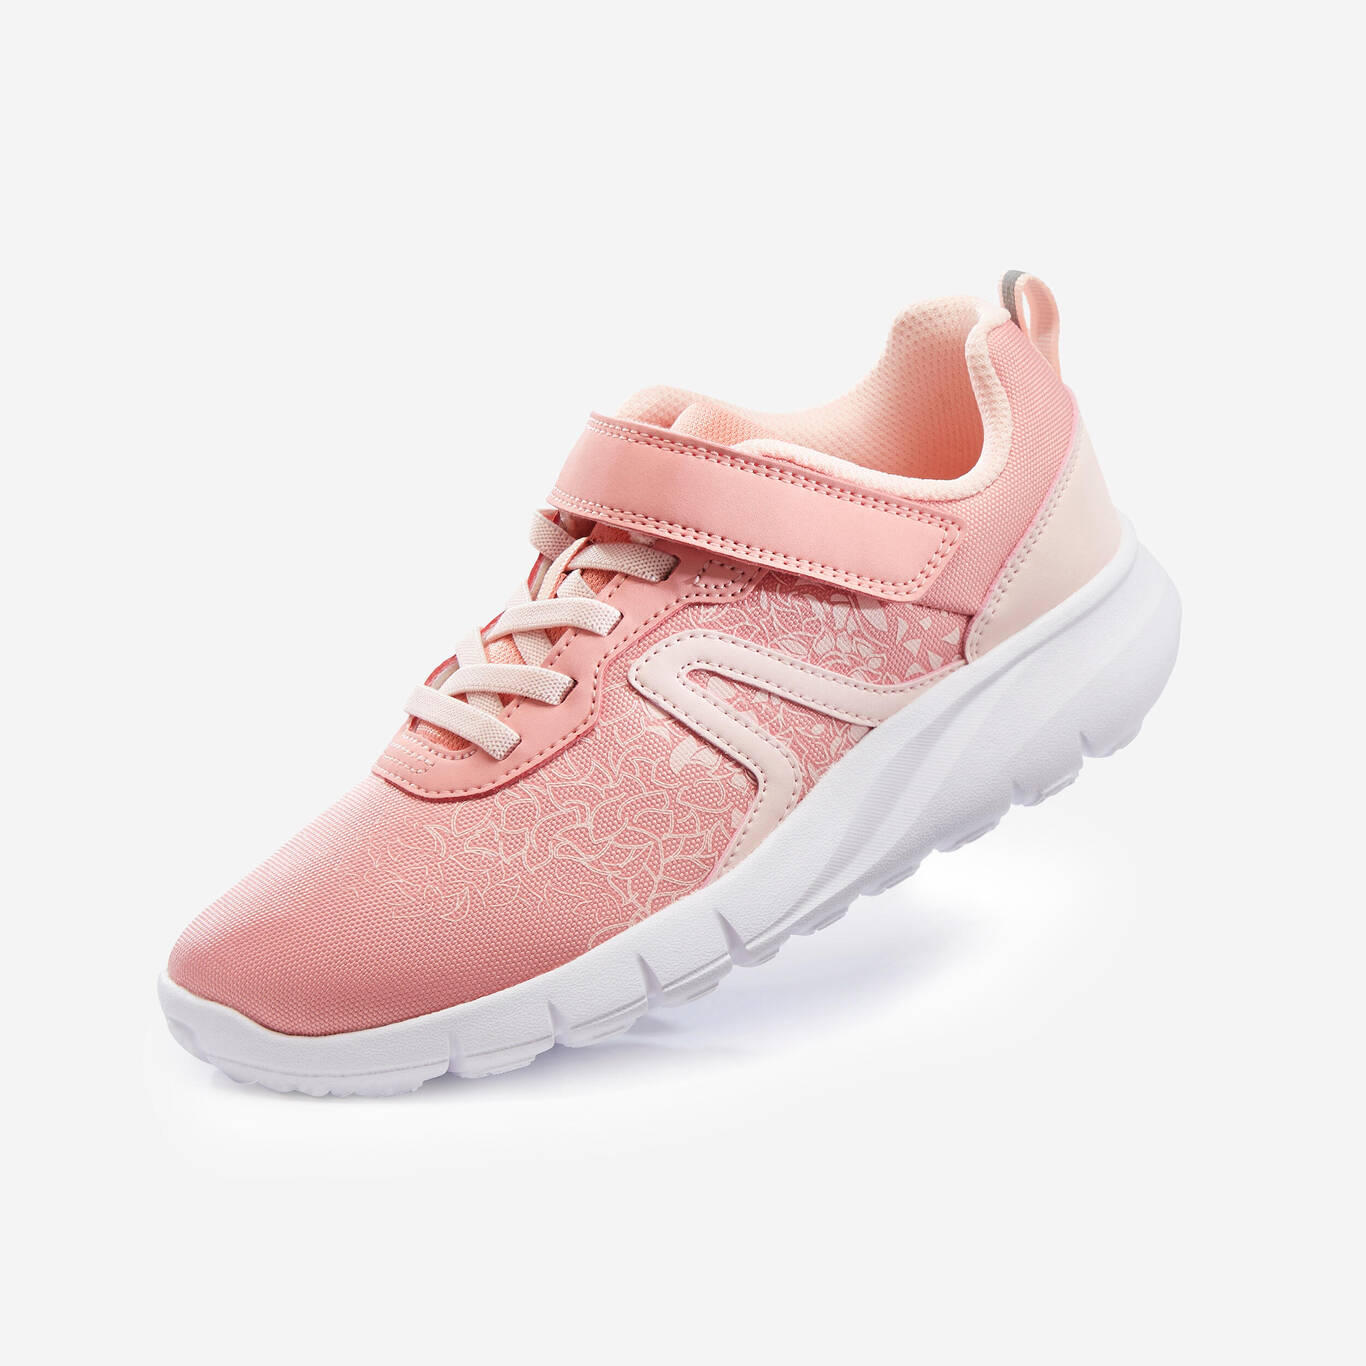 Kids' lightweight and waterproof rip-tab trainers, pink